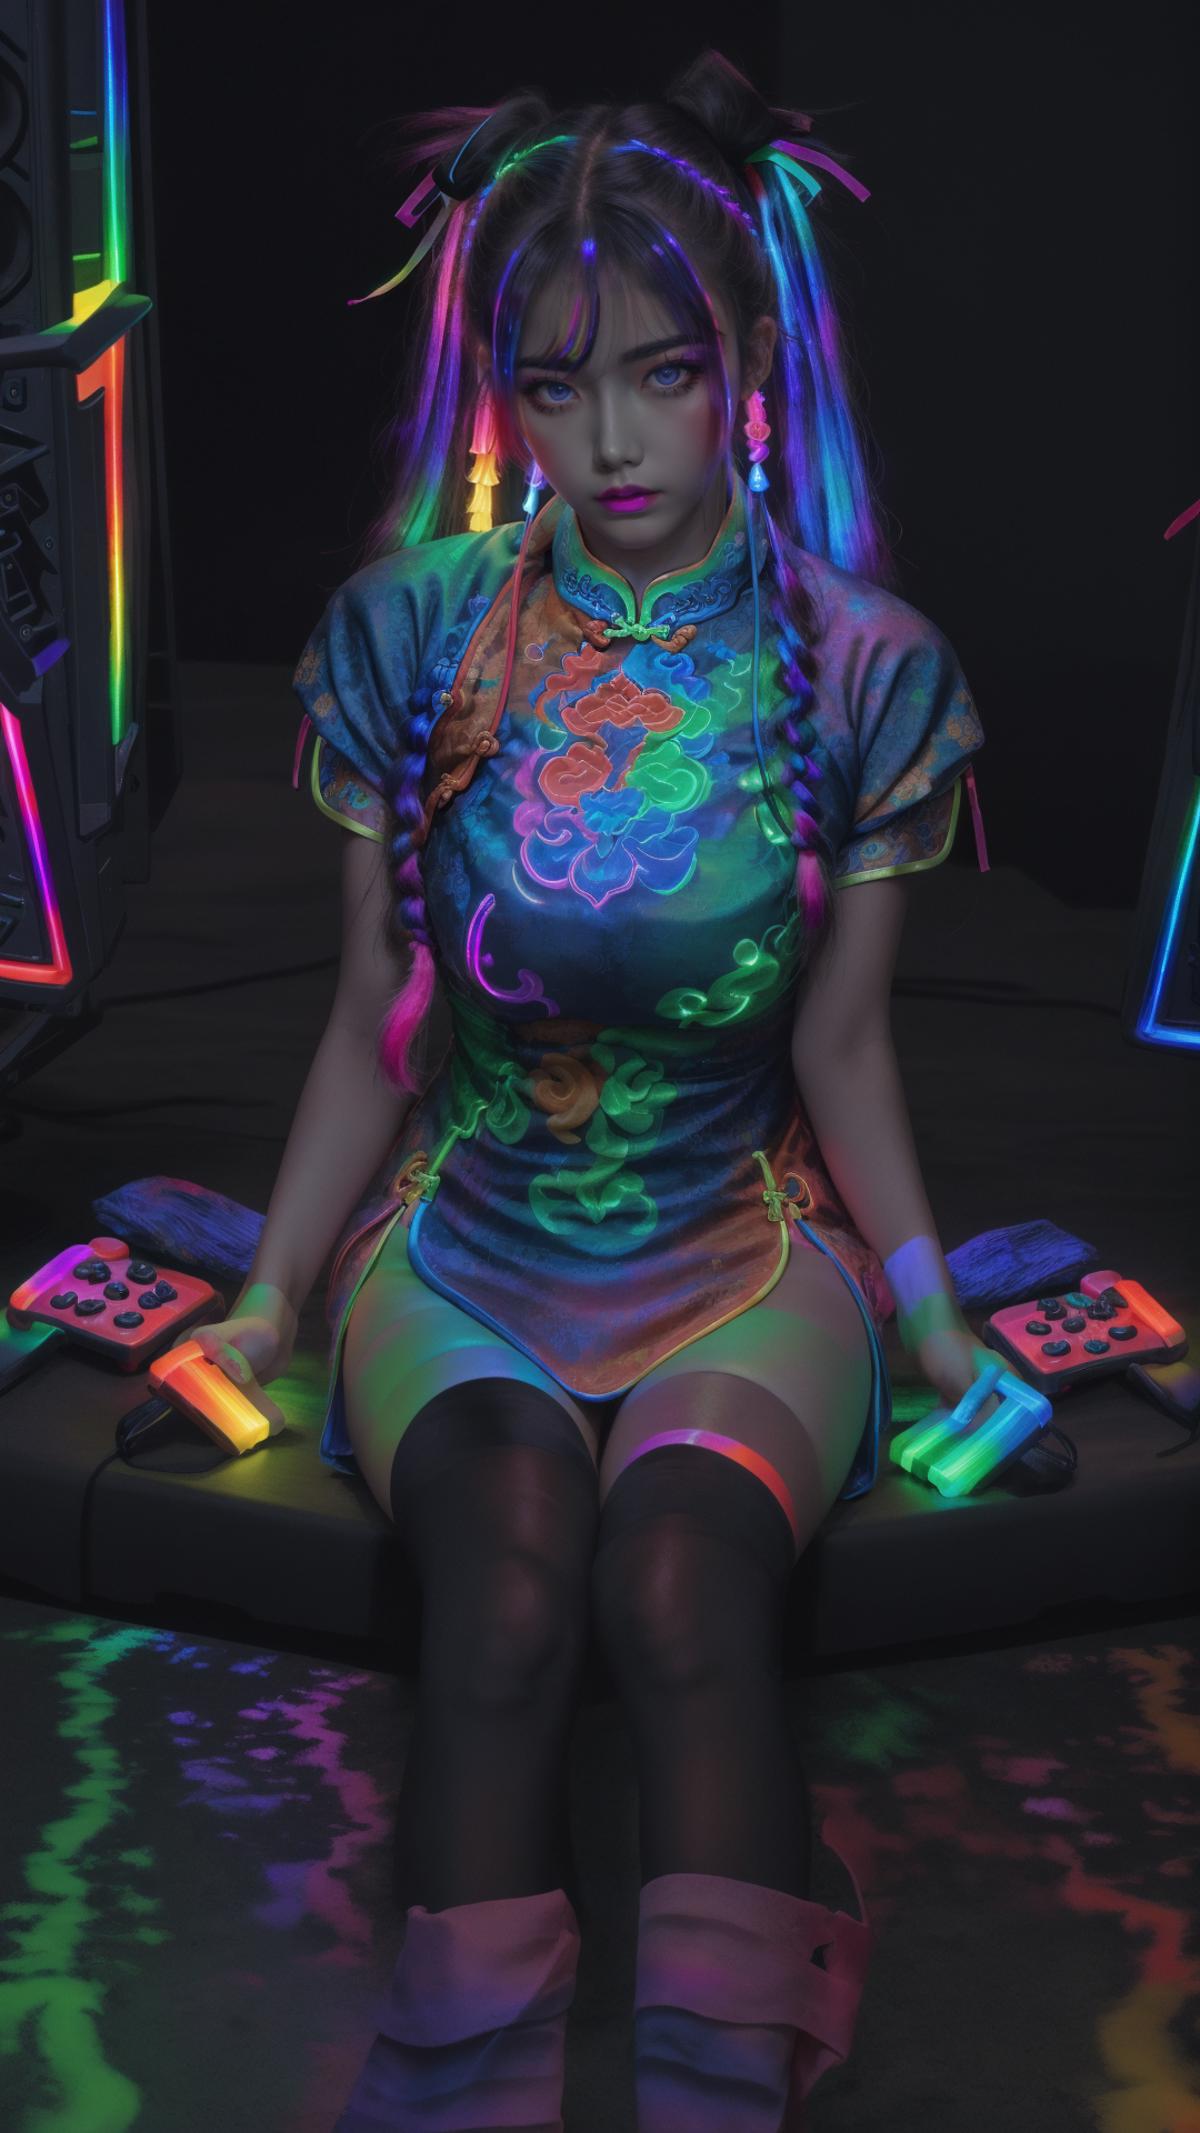 A woman in a colorful dress is sitting with two video game controllers in her lap.